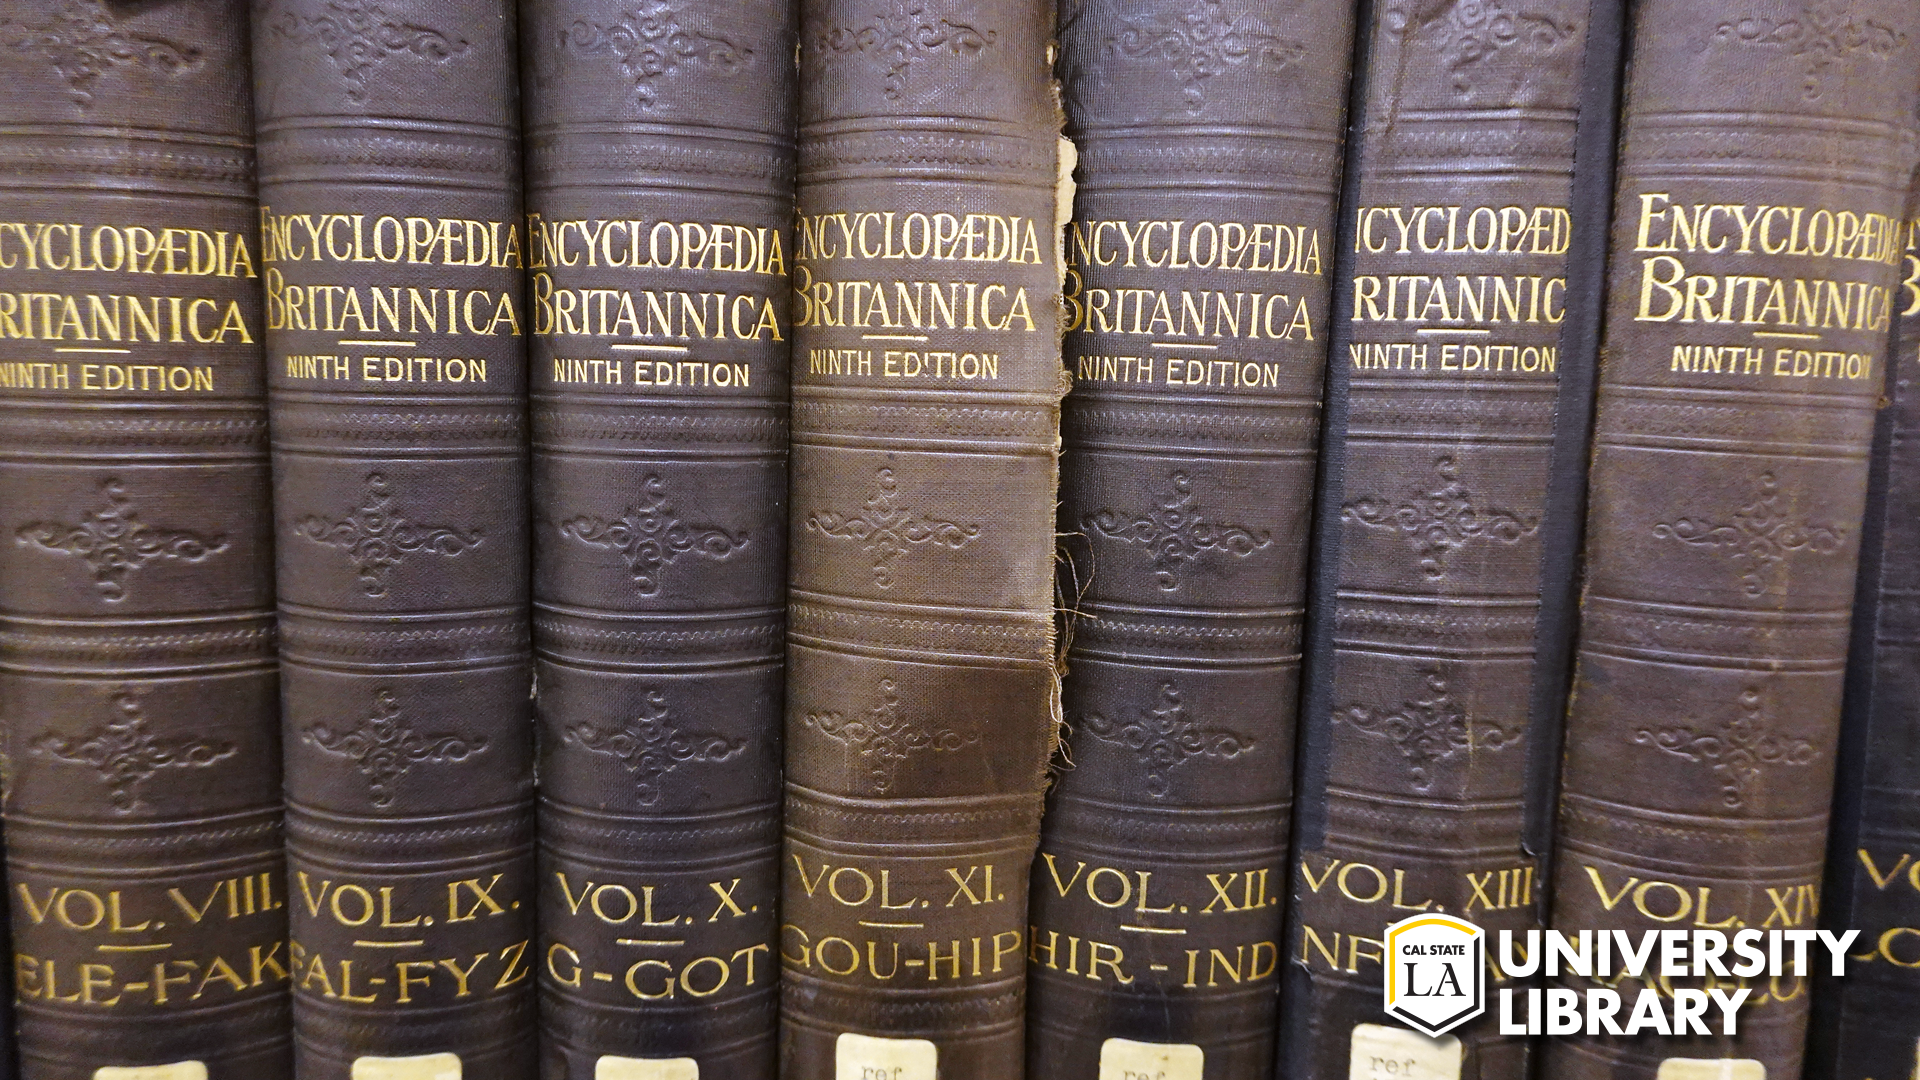 1898 edition of Encyclopedia Brittanica, housed in the rare books section of Special Collections & Archives